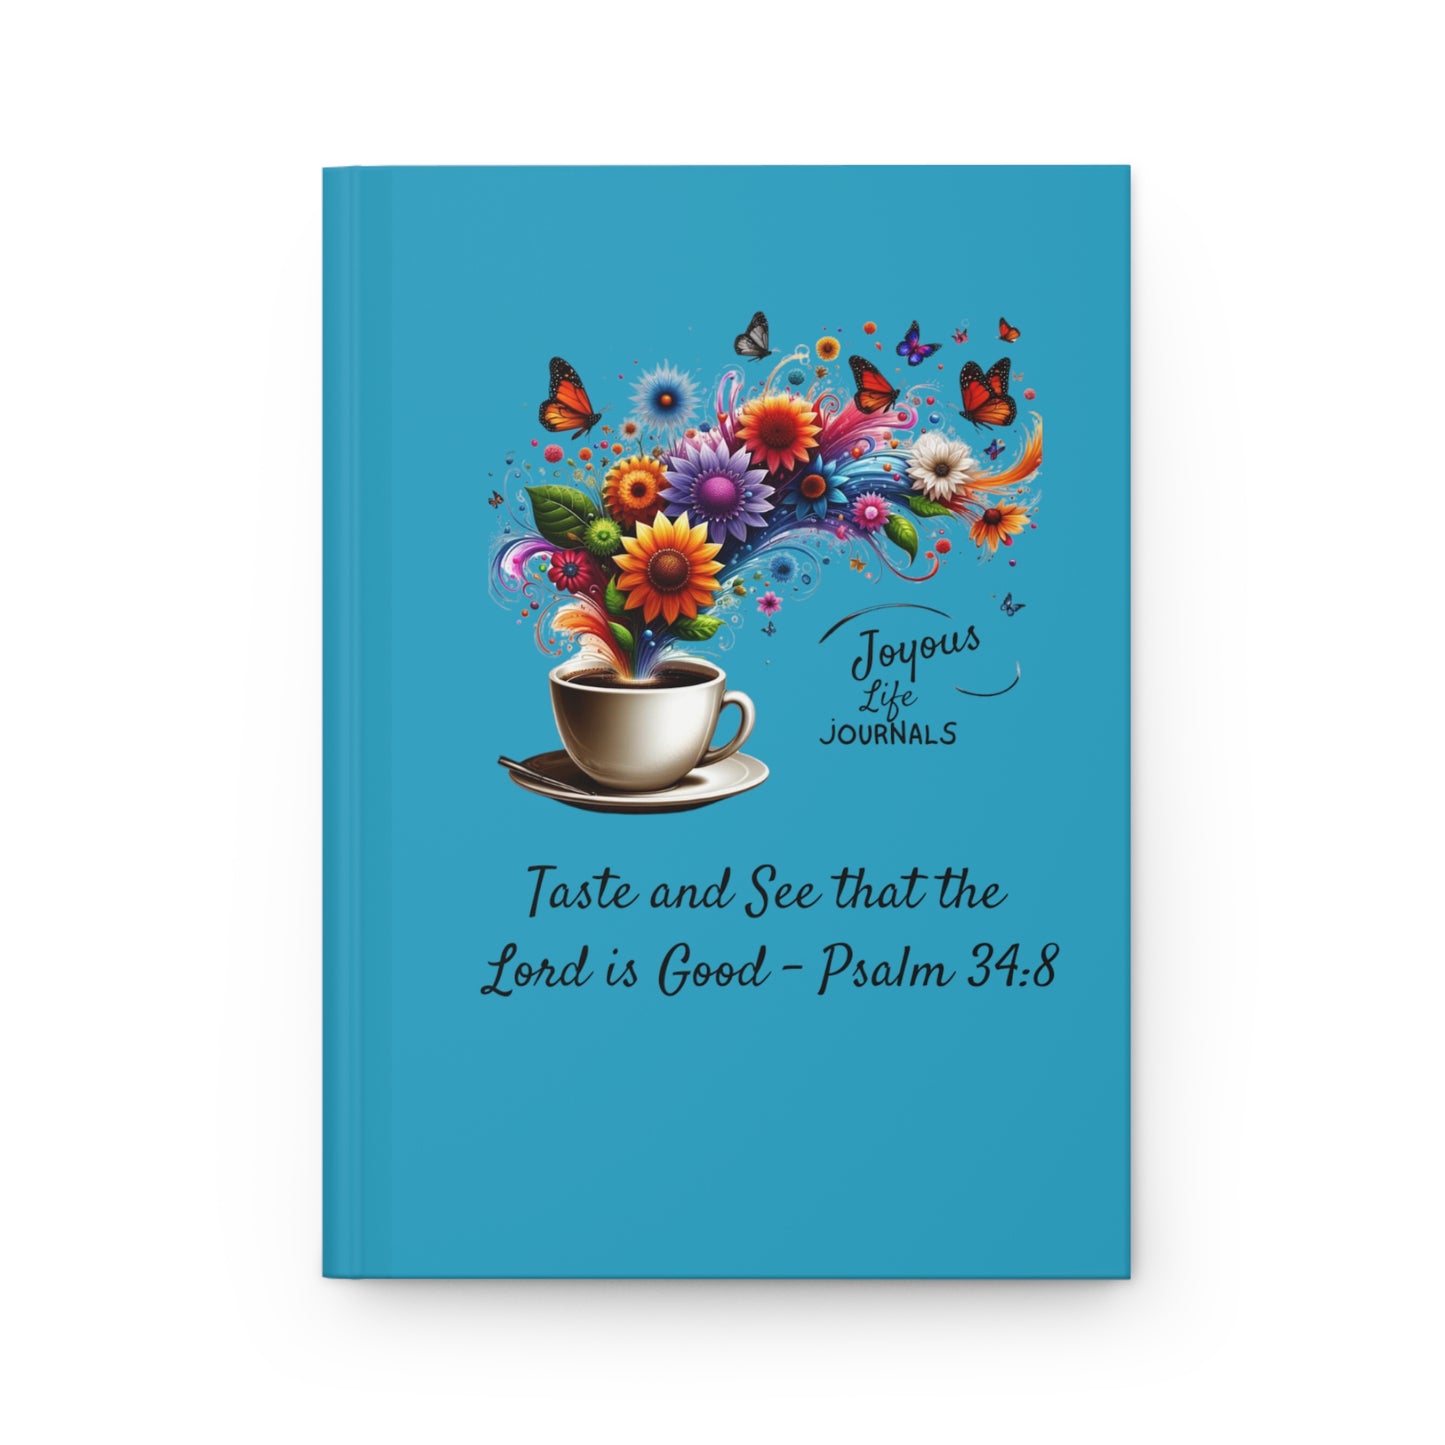 Divine Flavor: Taste and See that the Lord is Good - Psalm 34:8 Turquoise Matte Journal, Joyous Life Journals